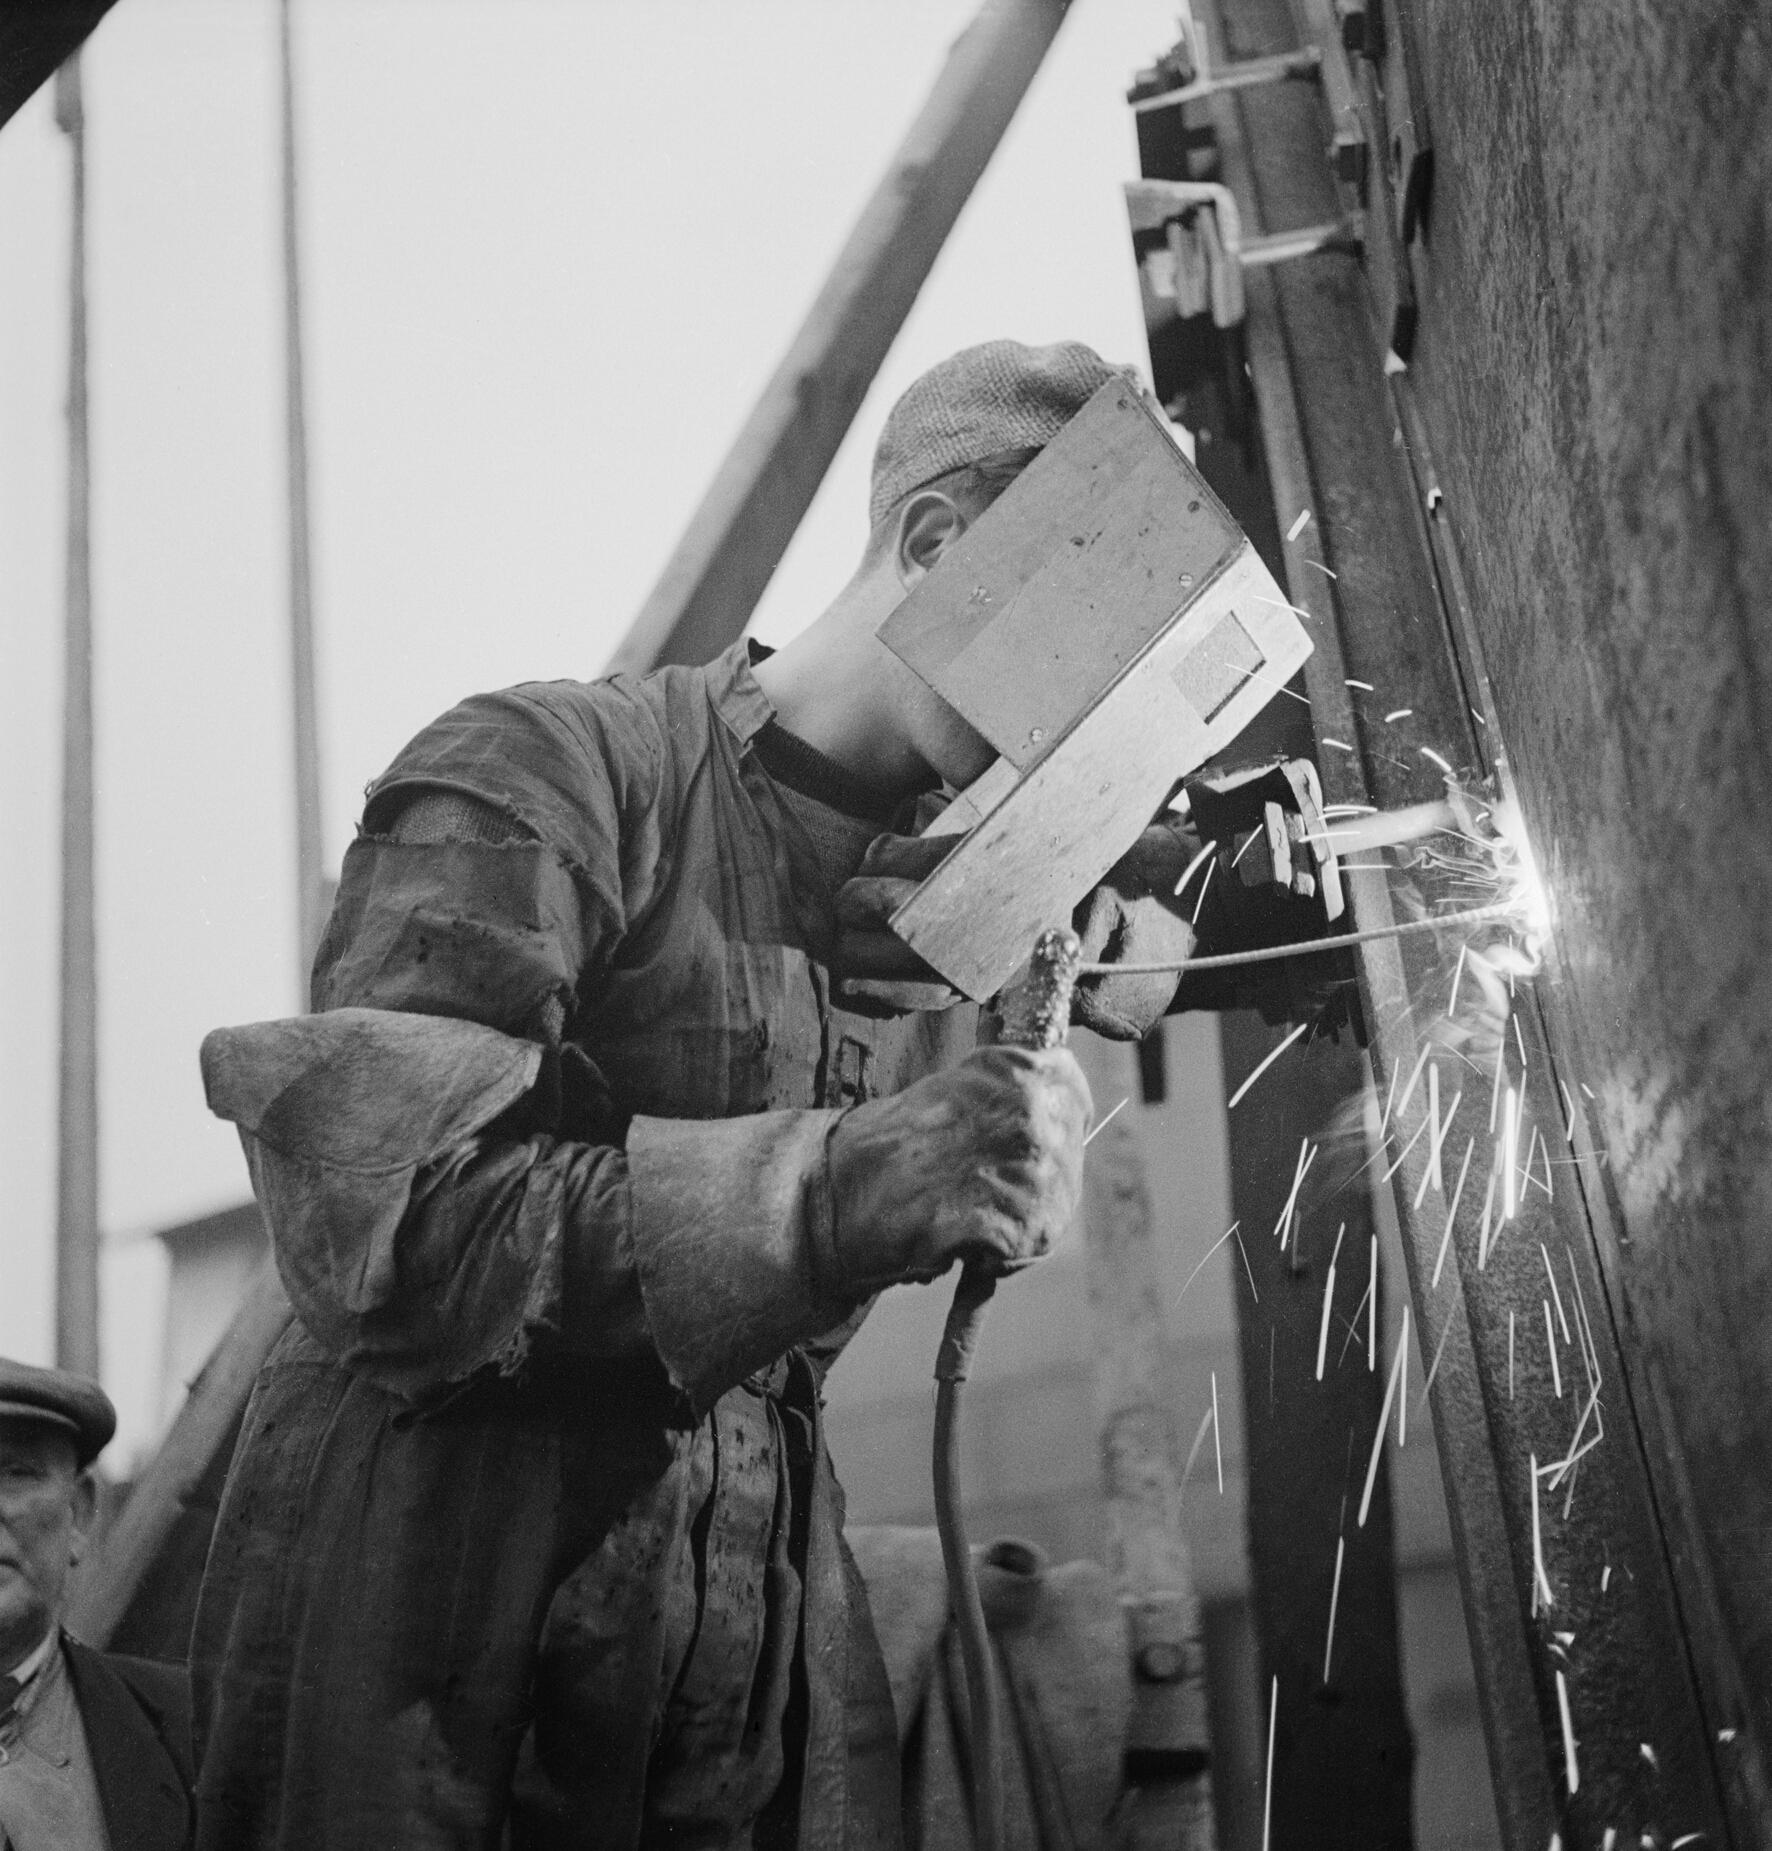 A welder working on a ship during WW2